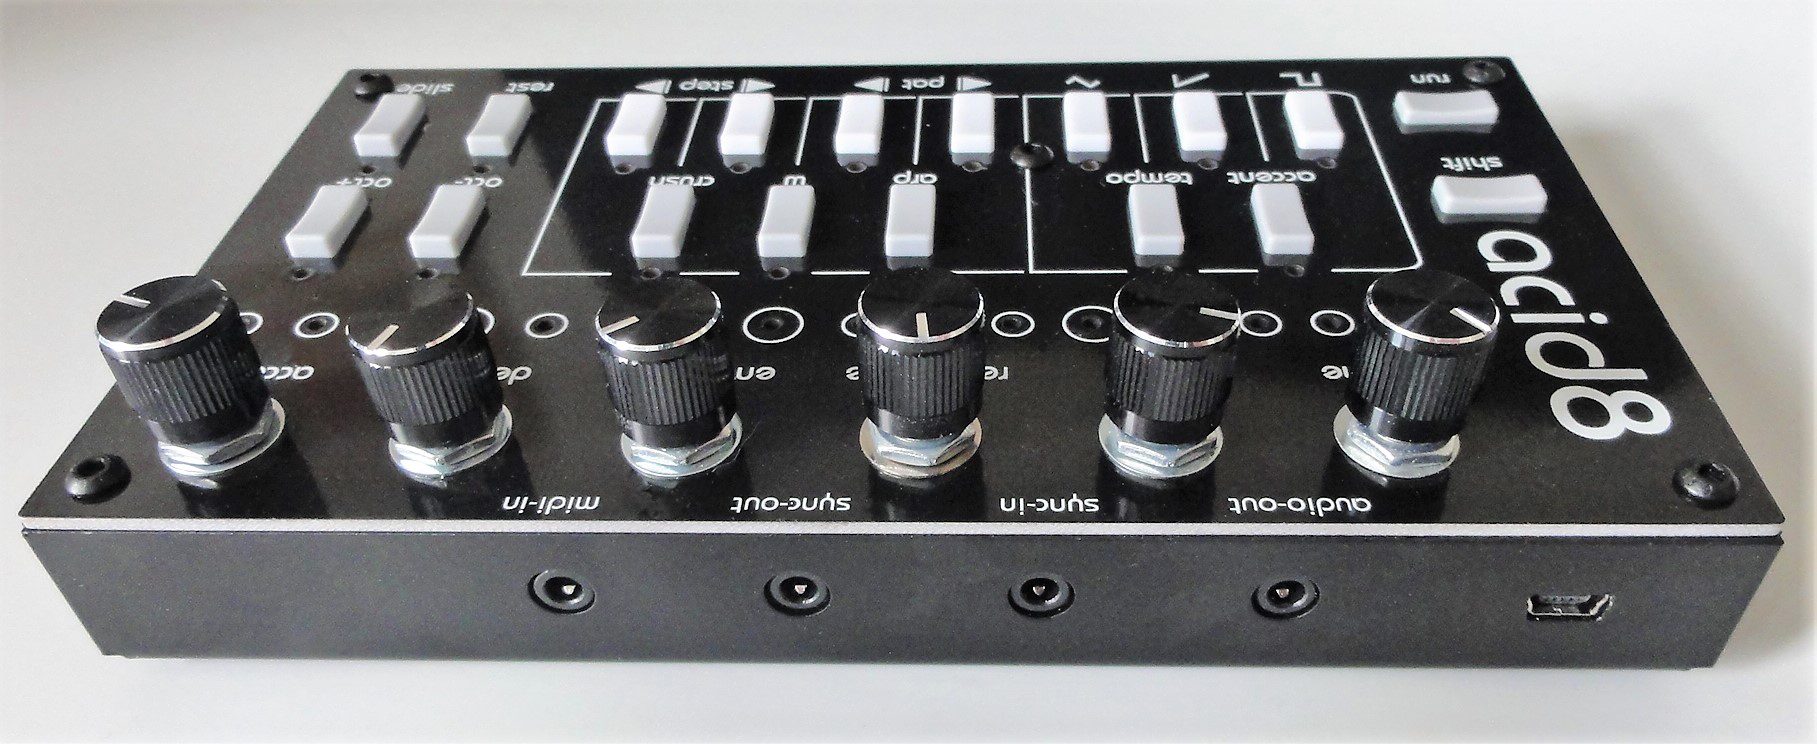 Test: Twisted Electrons Acid8 MKIII, 8-Bit Bass-Synthesizer ...